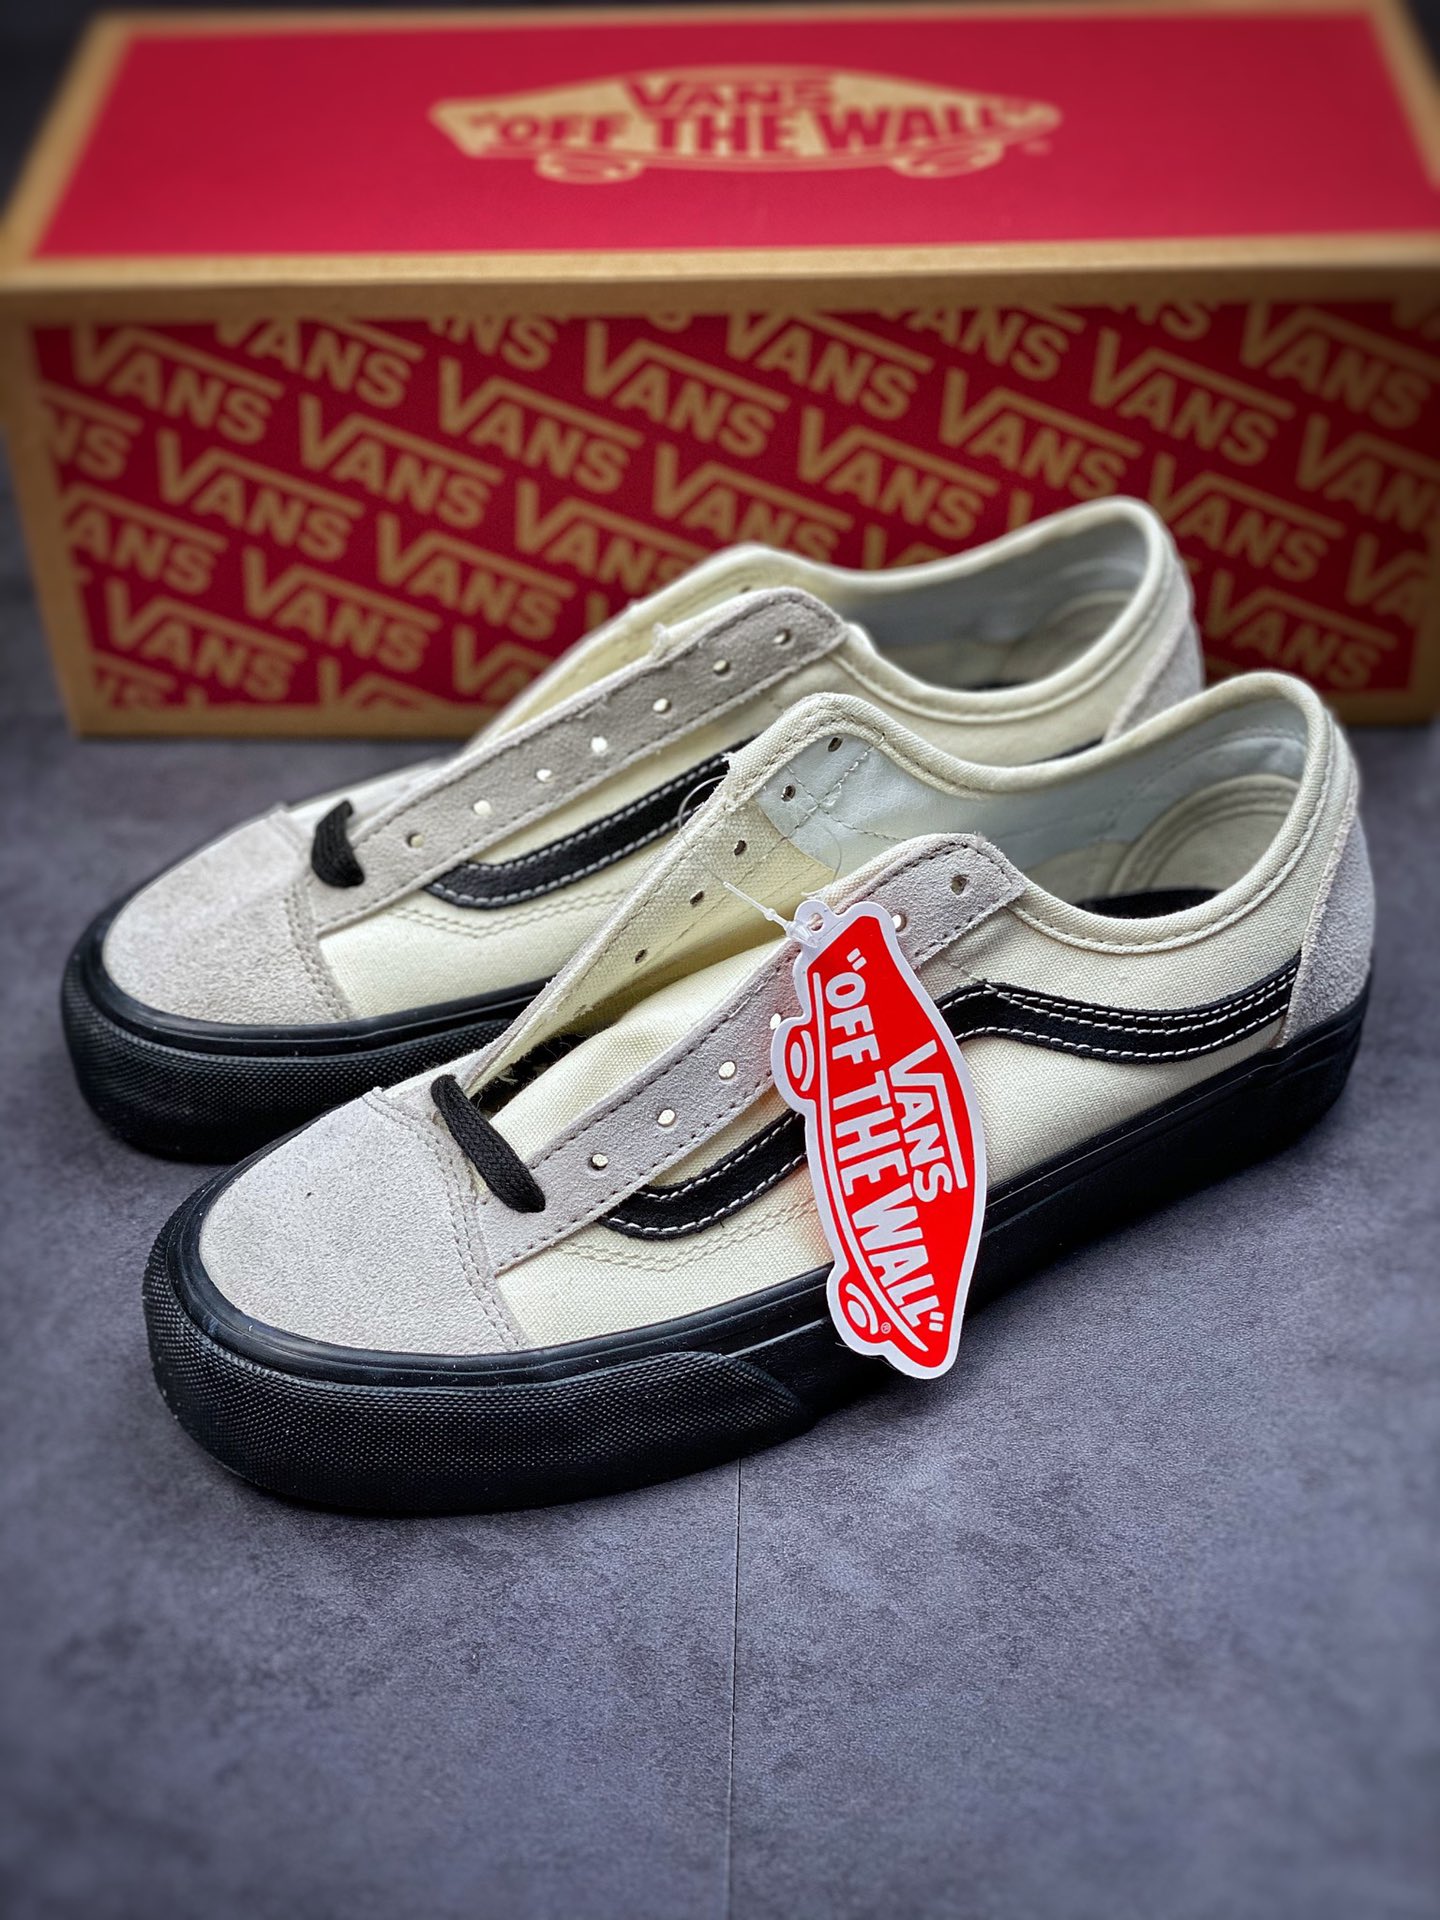 Vans Style 36 Oreo Vans New Black and White Rubber Sole